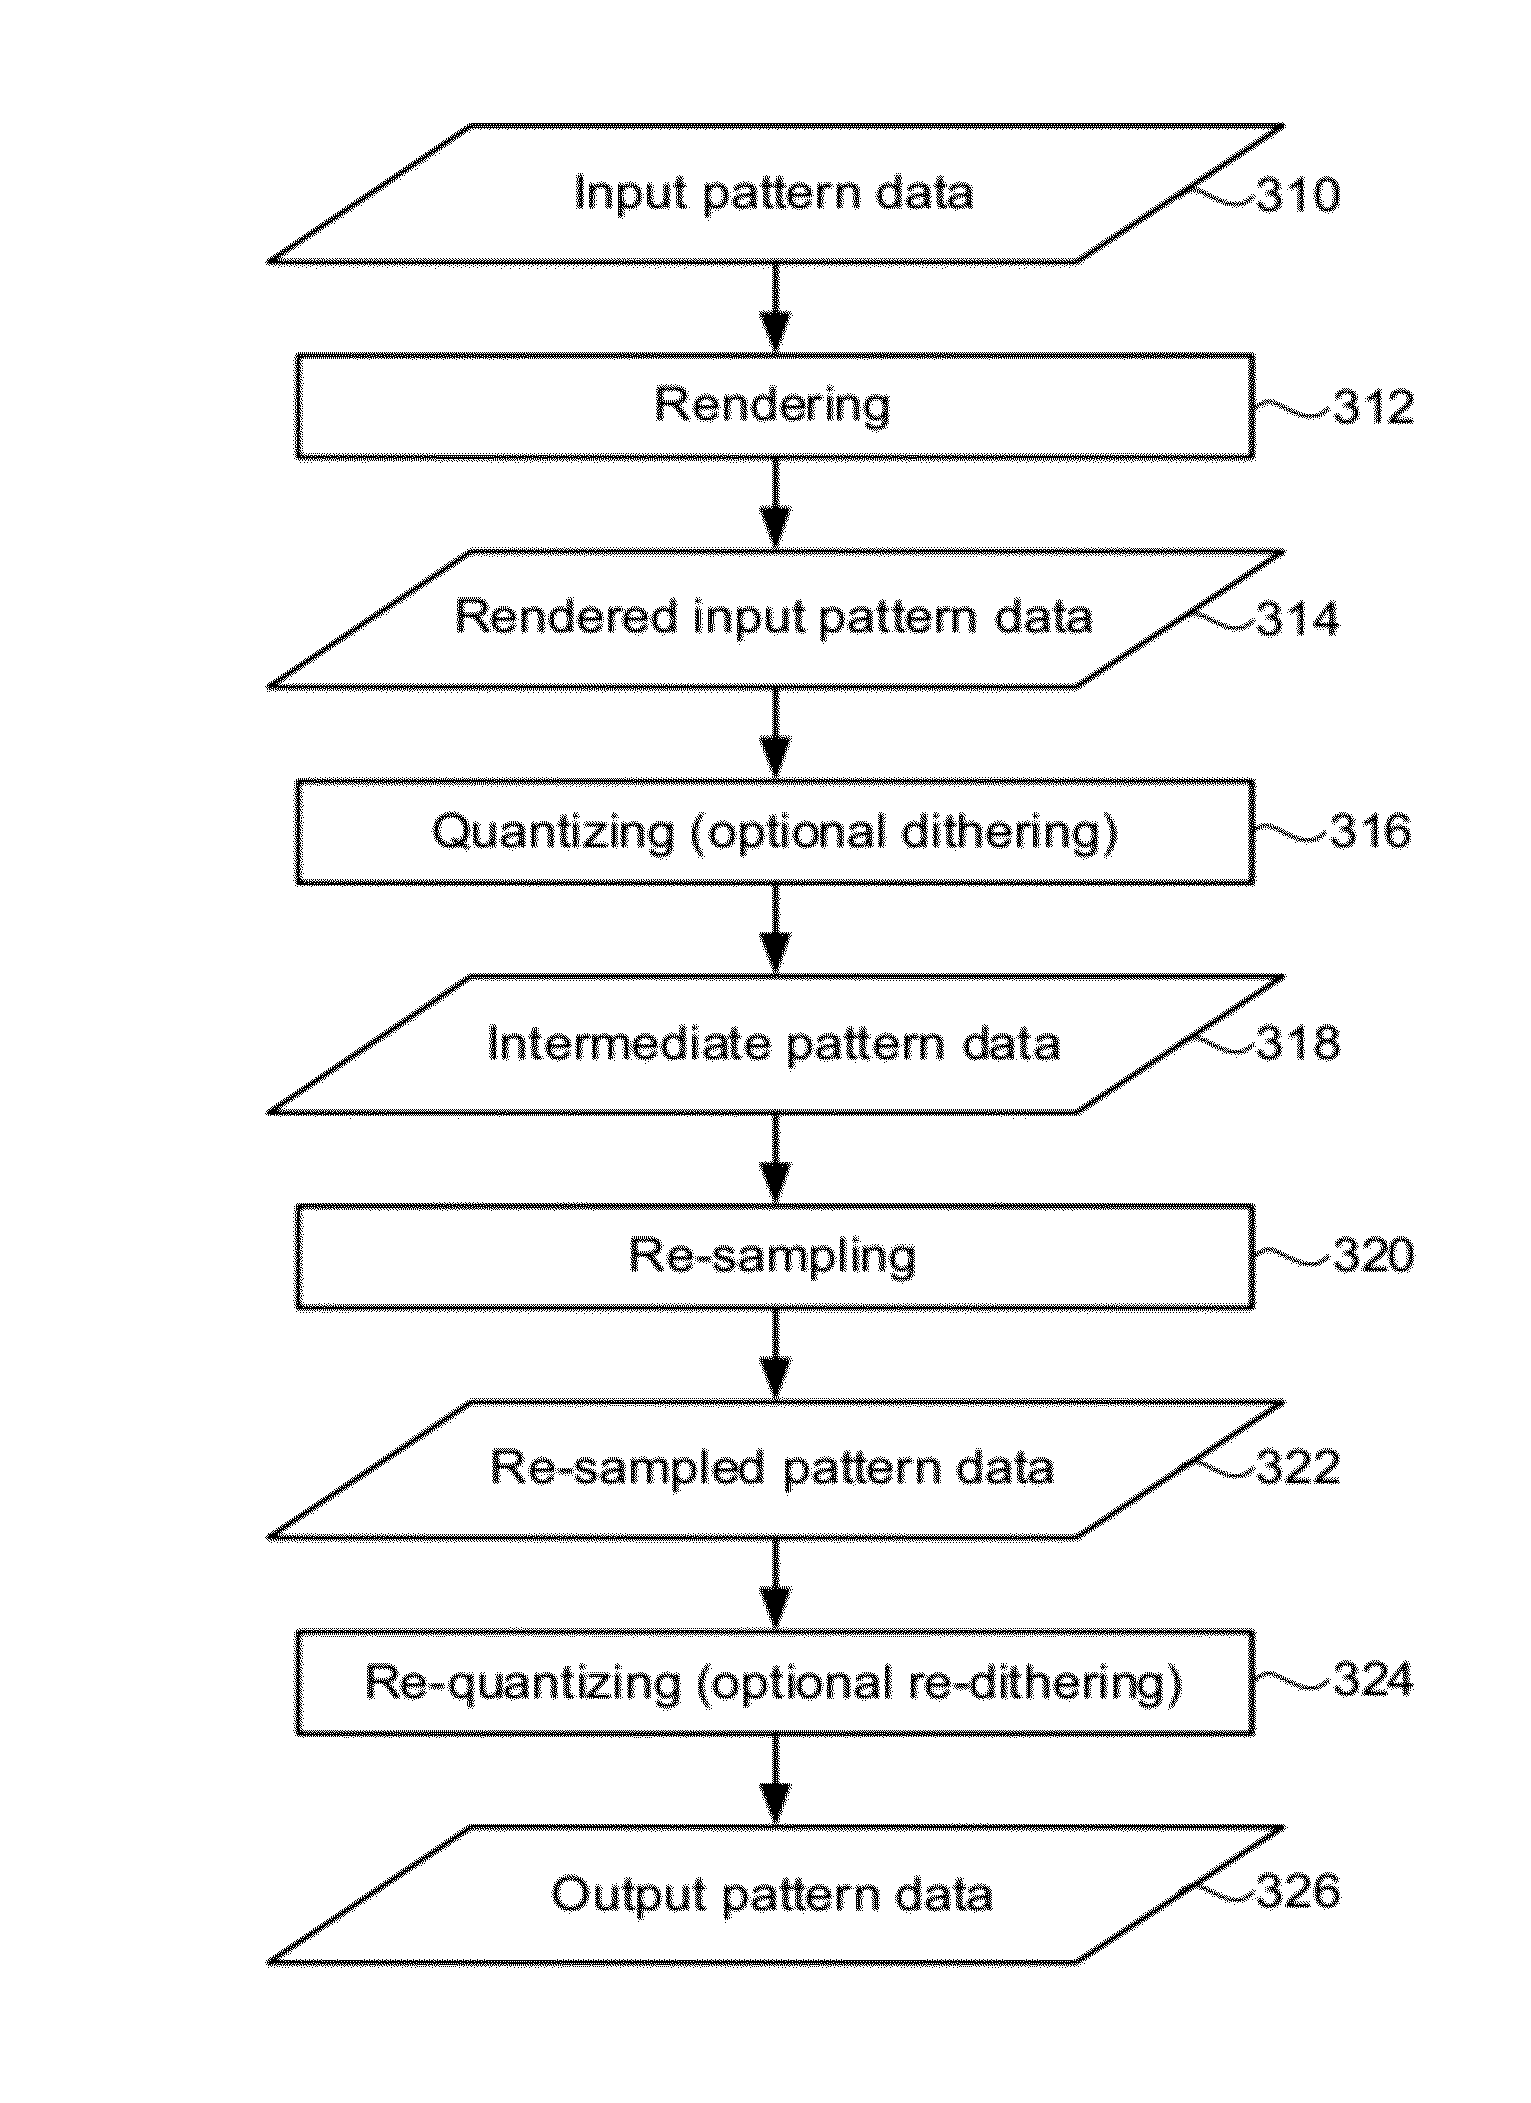 Pattern data conversion for lithography system